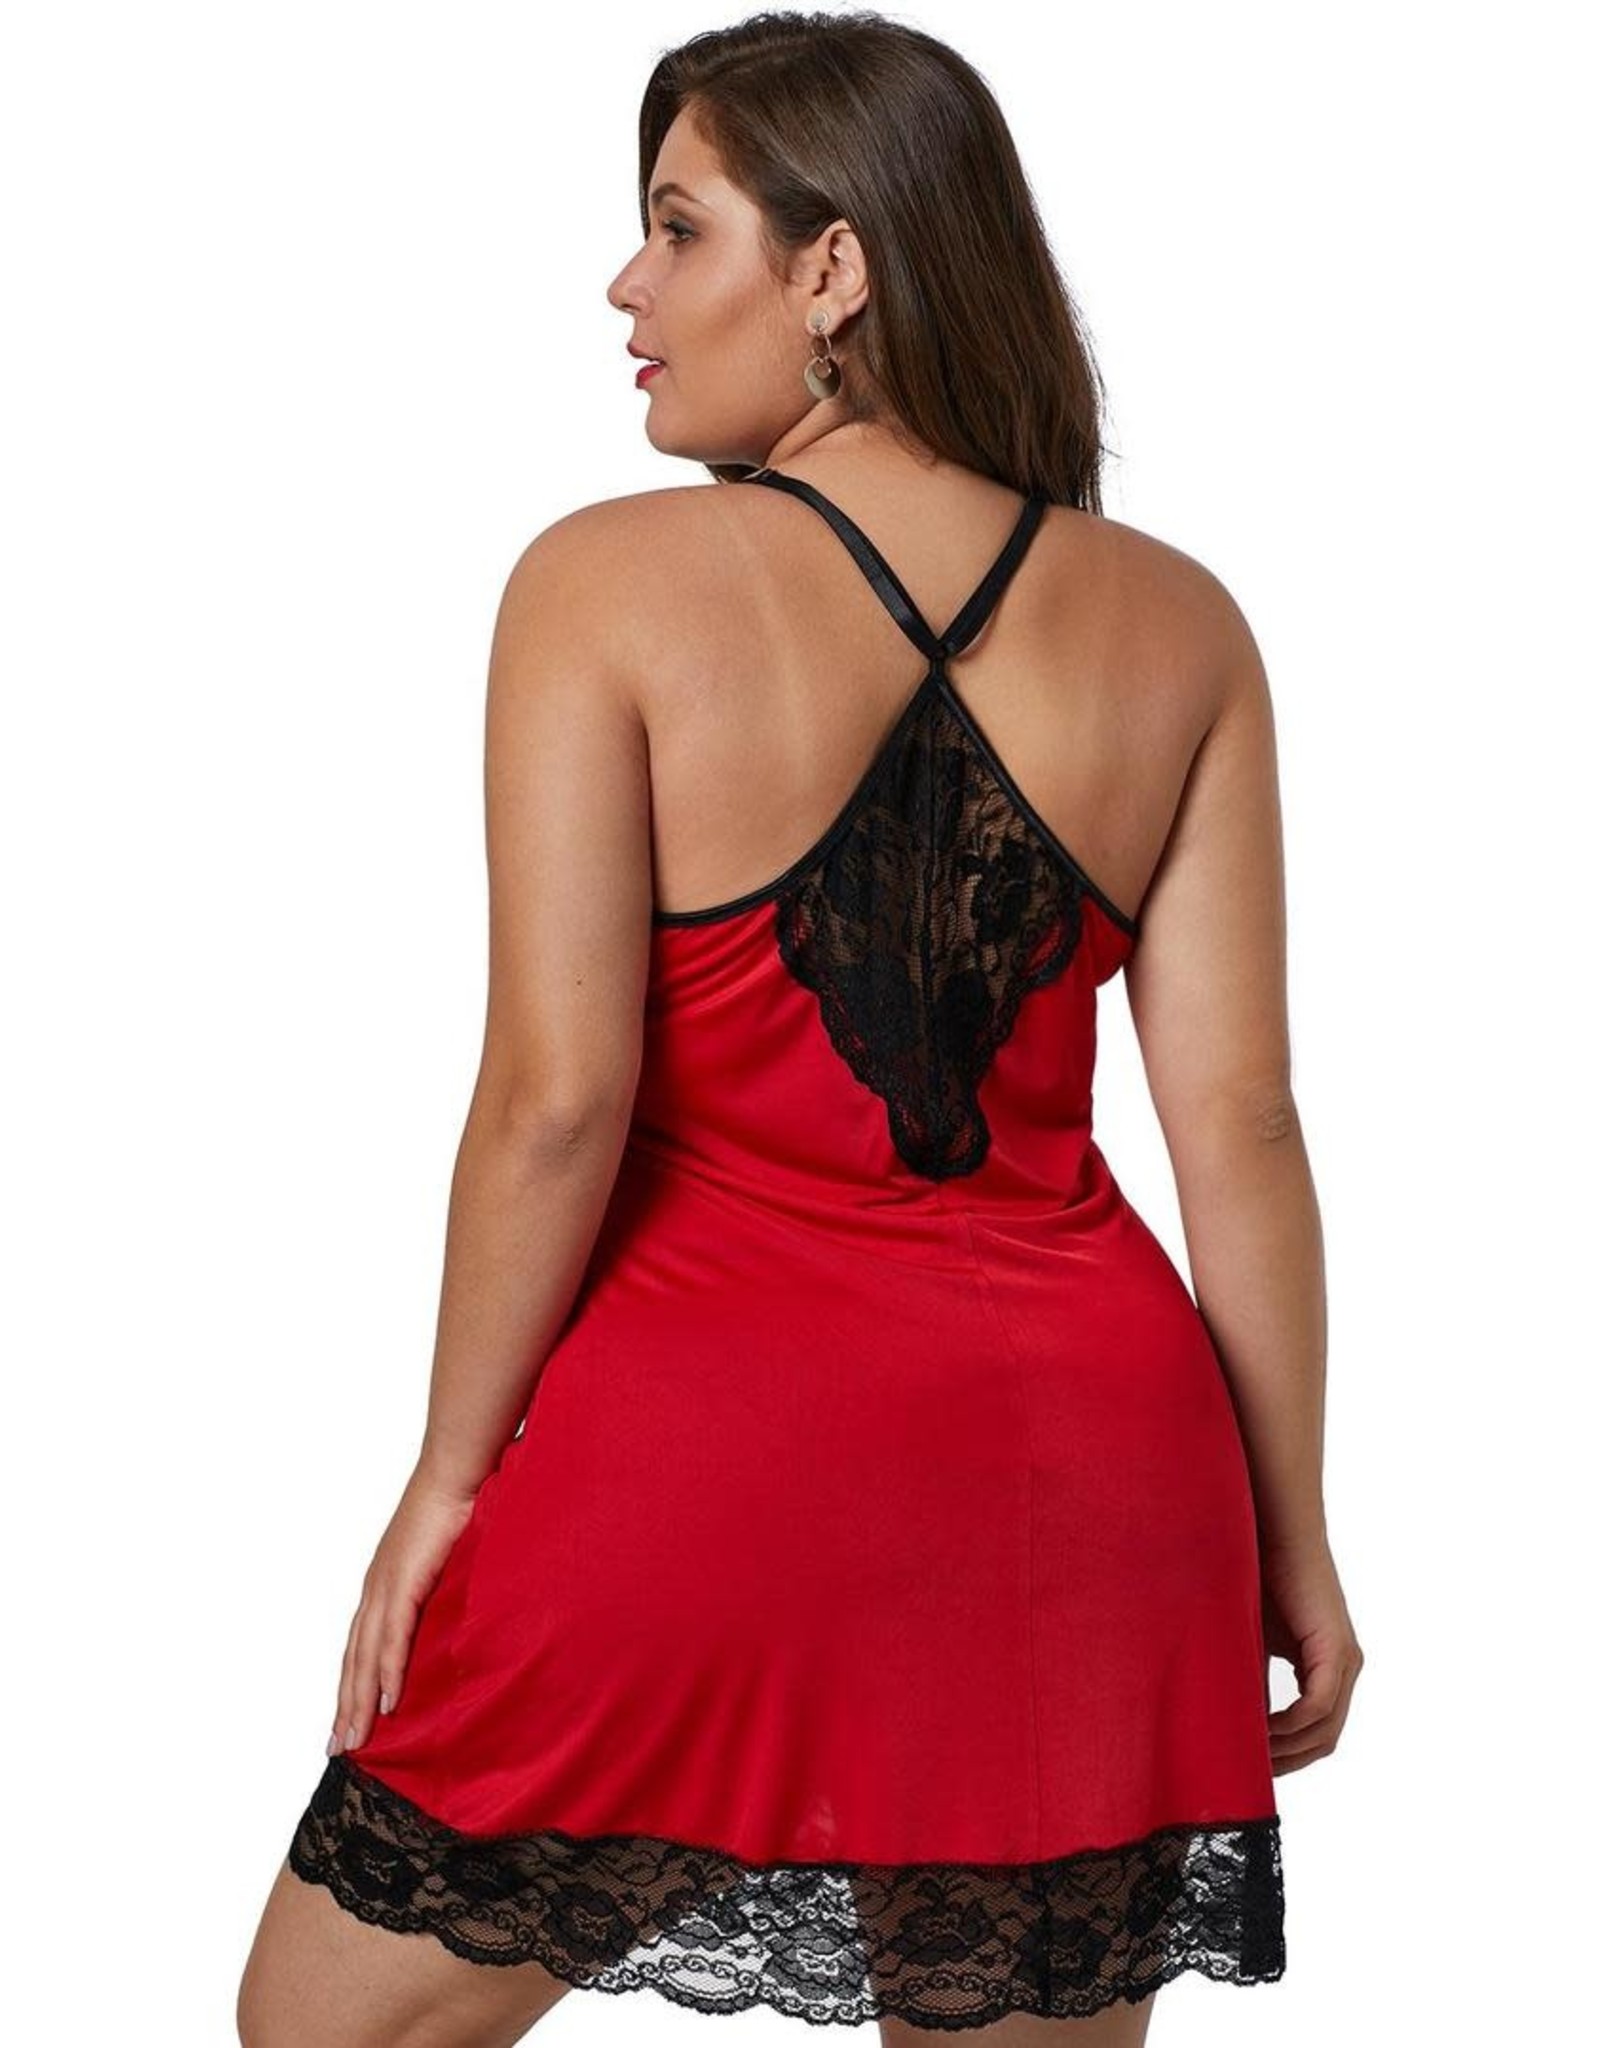 RED VENECIA CHEMISE WITH LACE TRIM - (US 18-20)2X